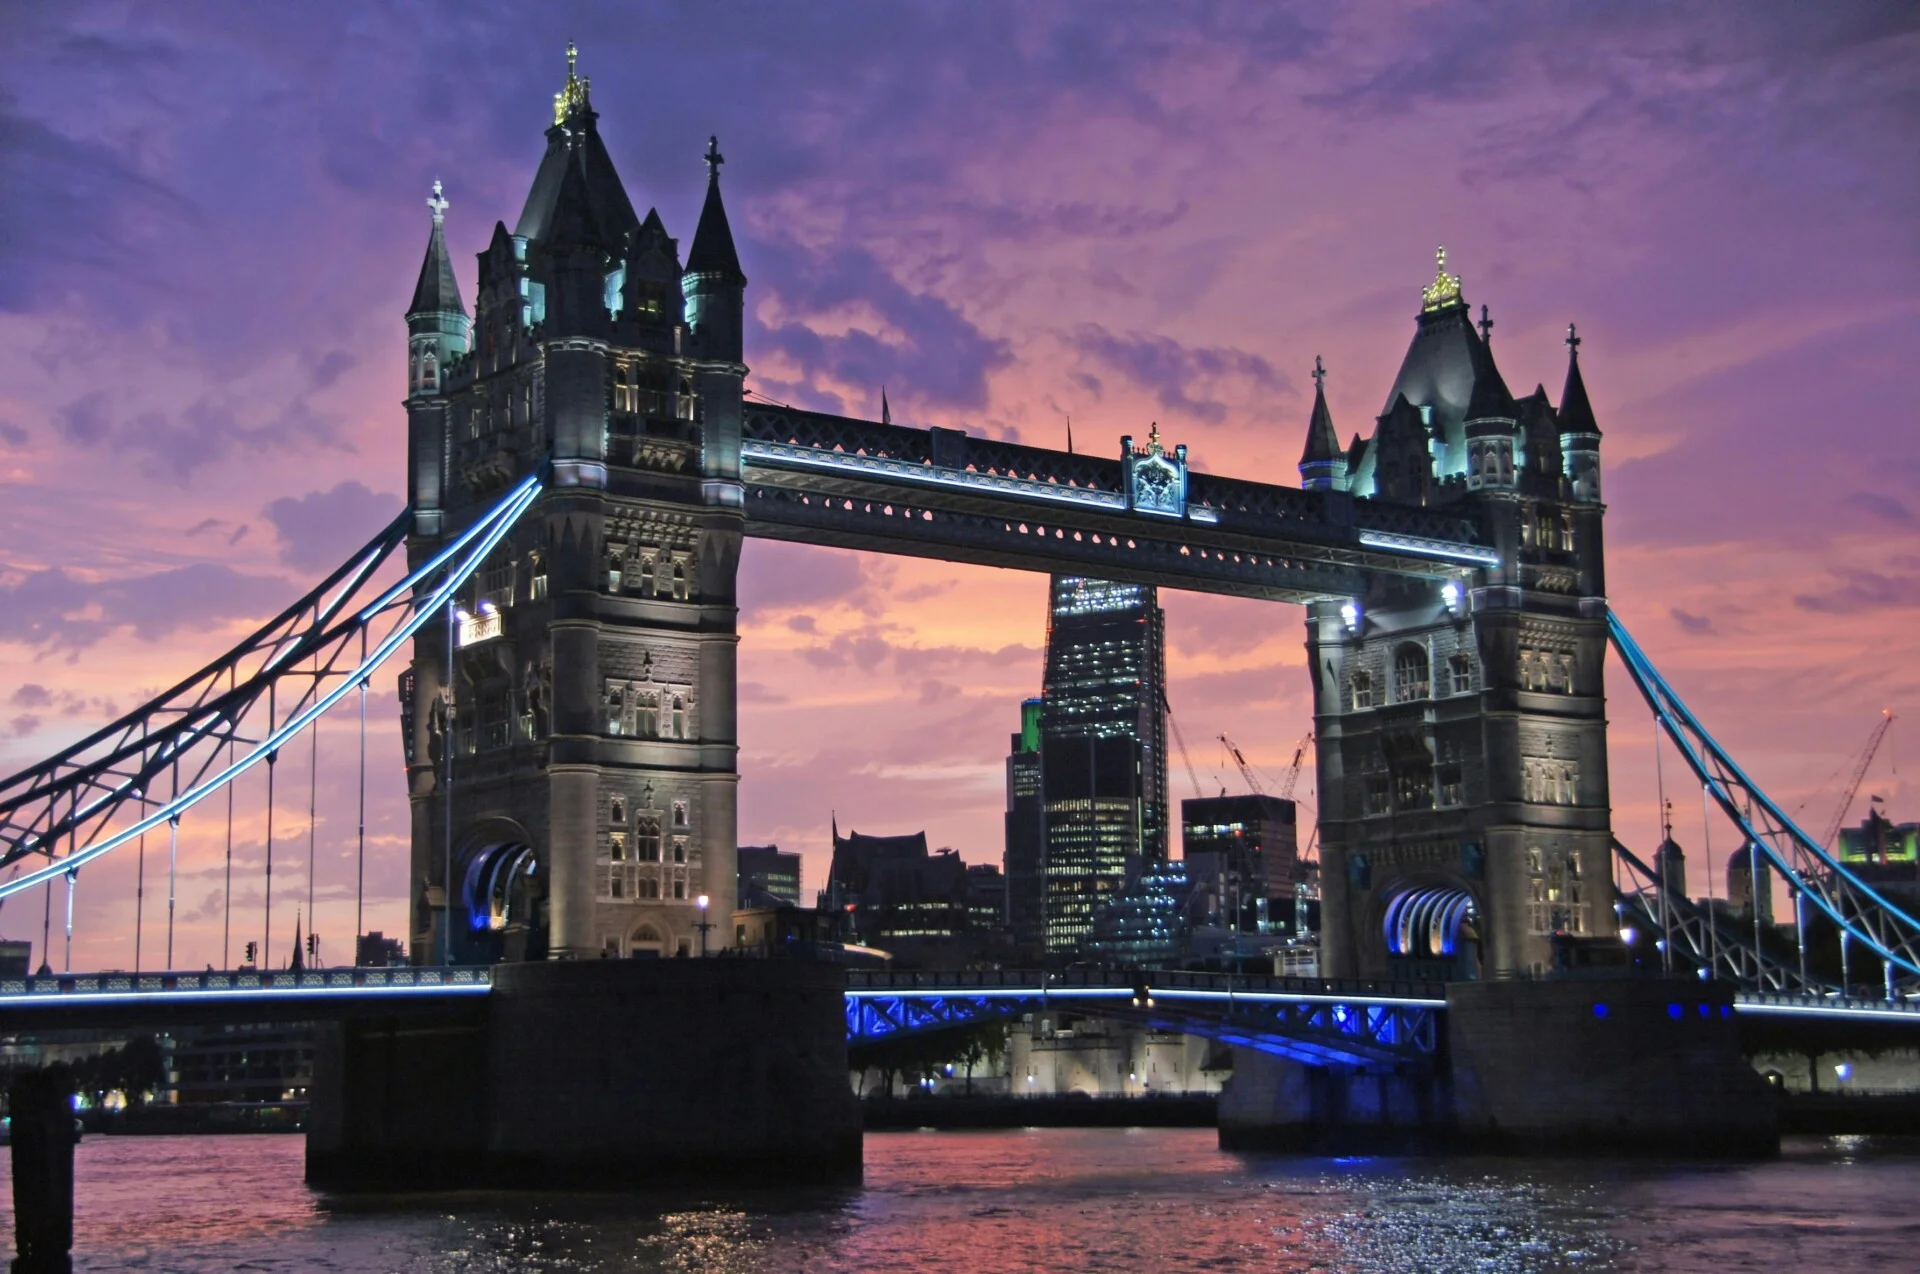 The Tower Bridge London with a purple sky backdrop